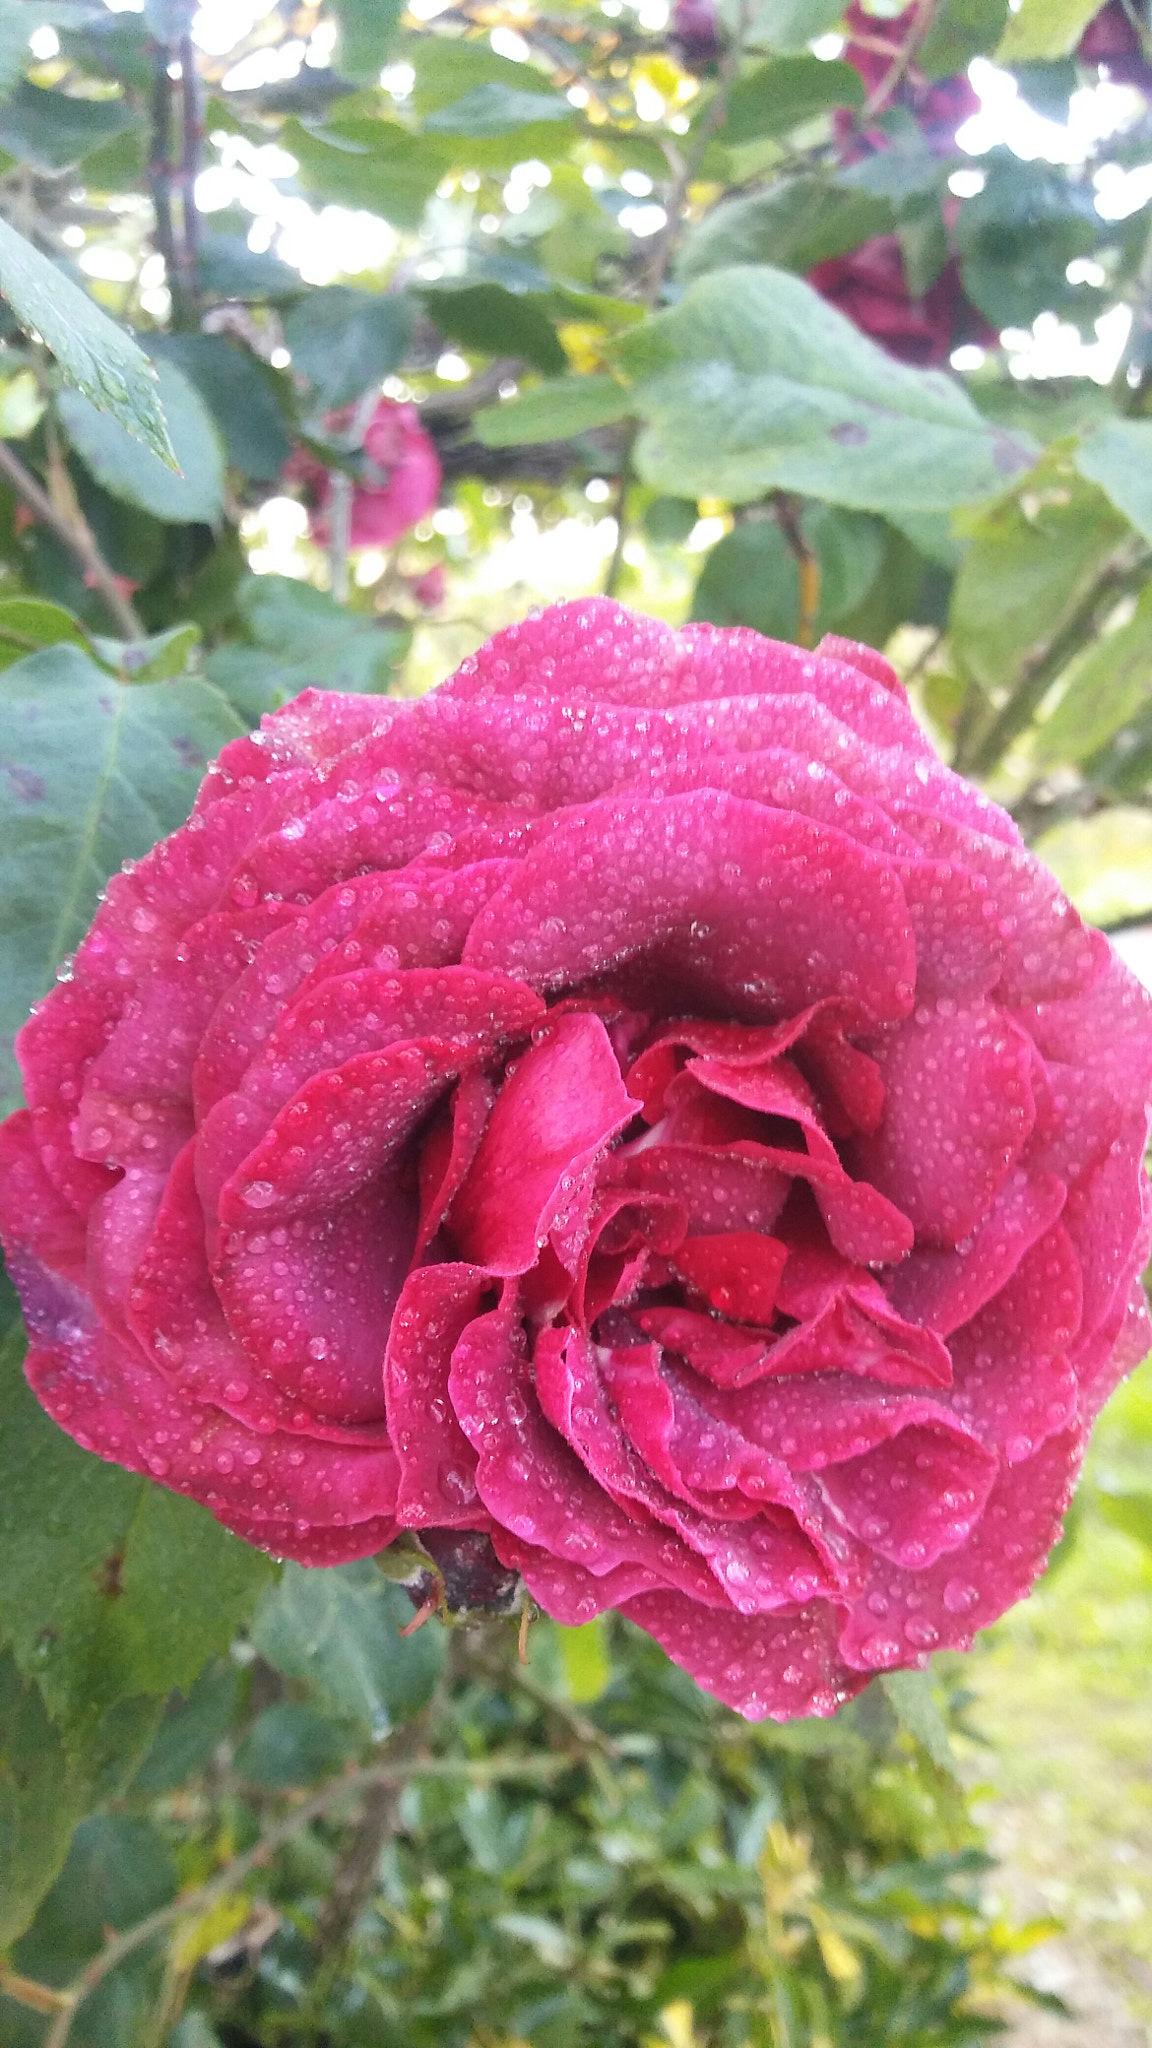 LG K10 sample photo. Red rose photography